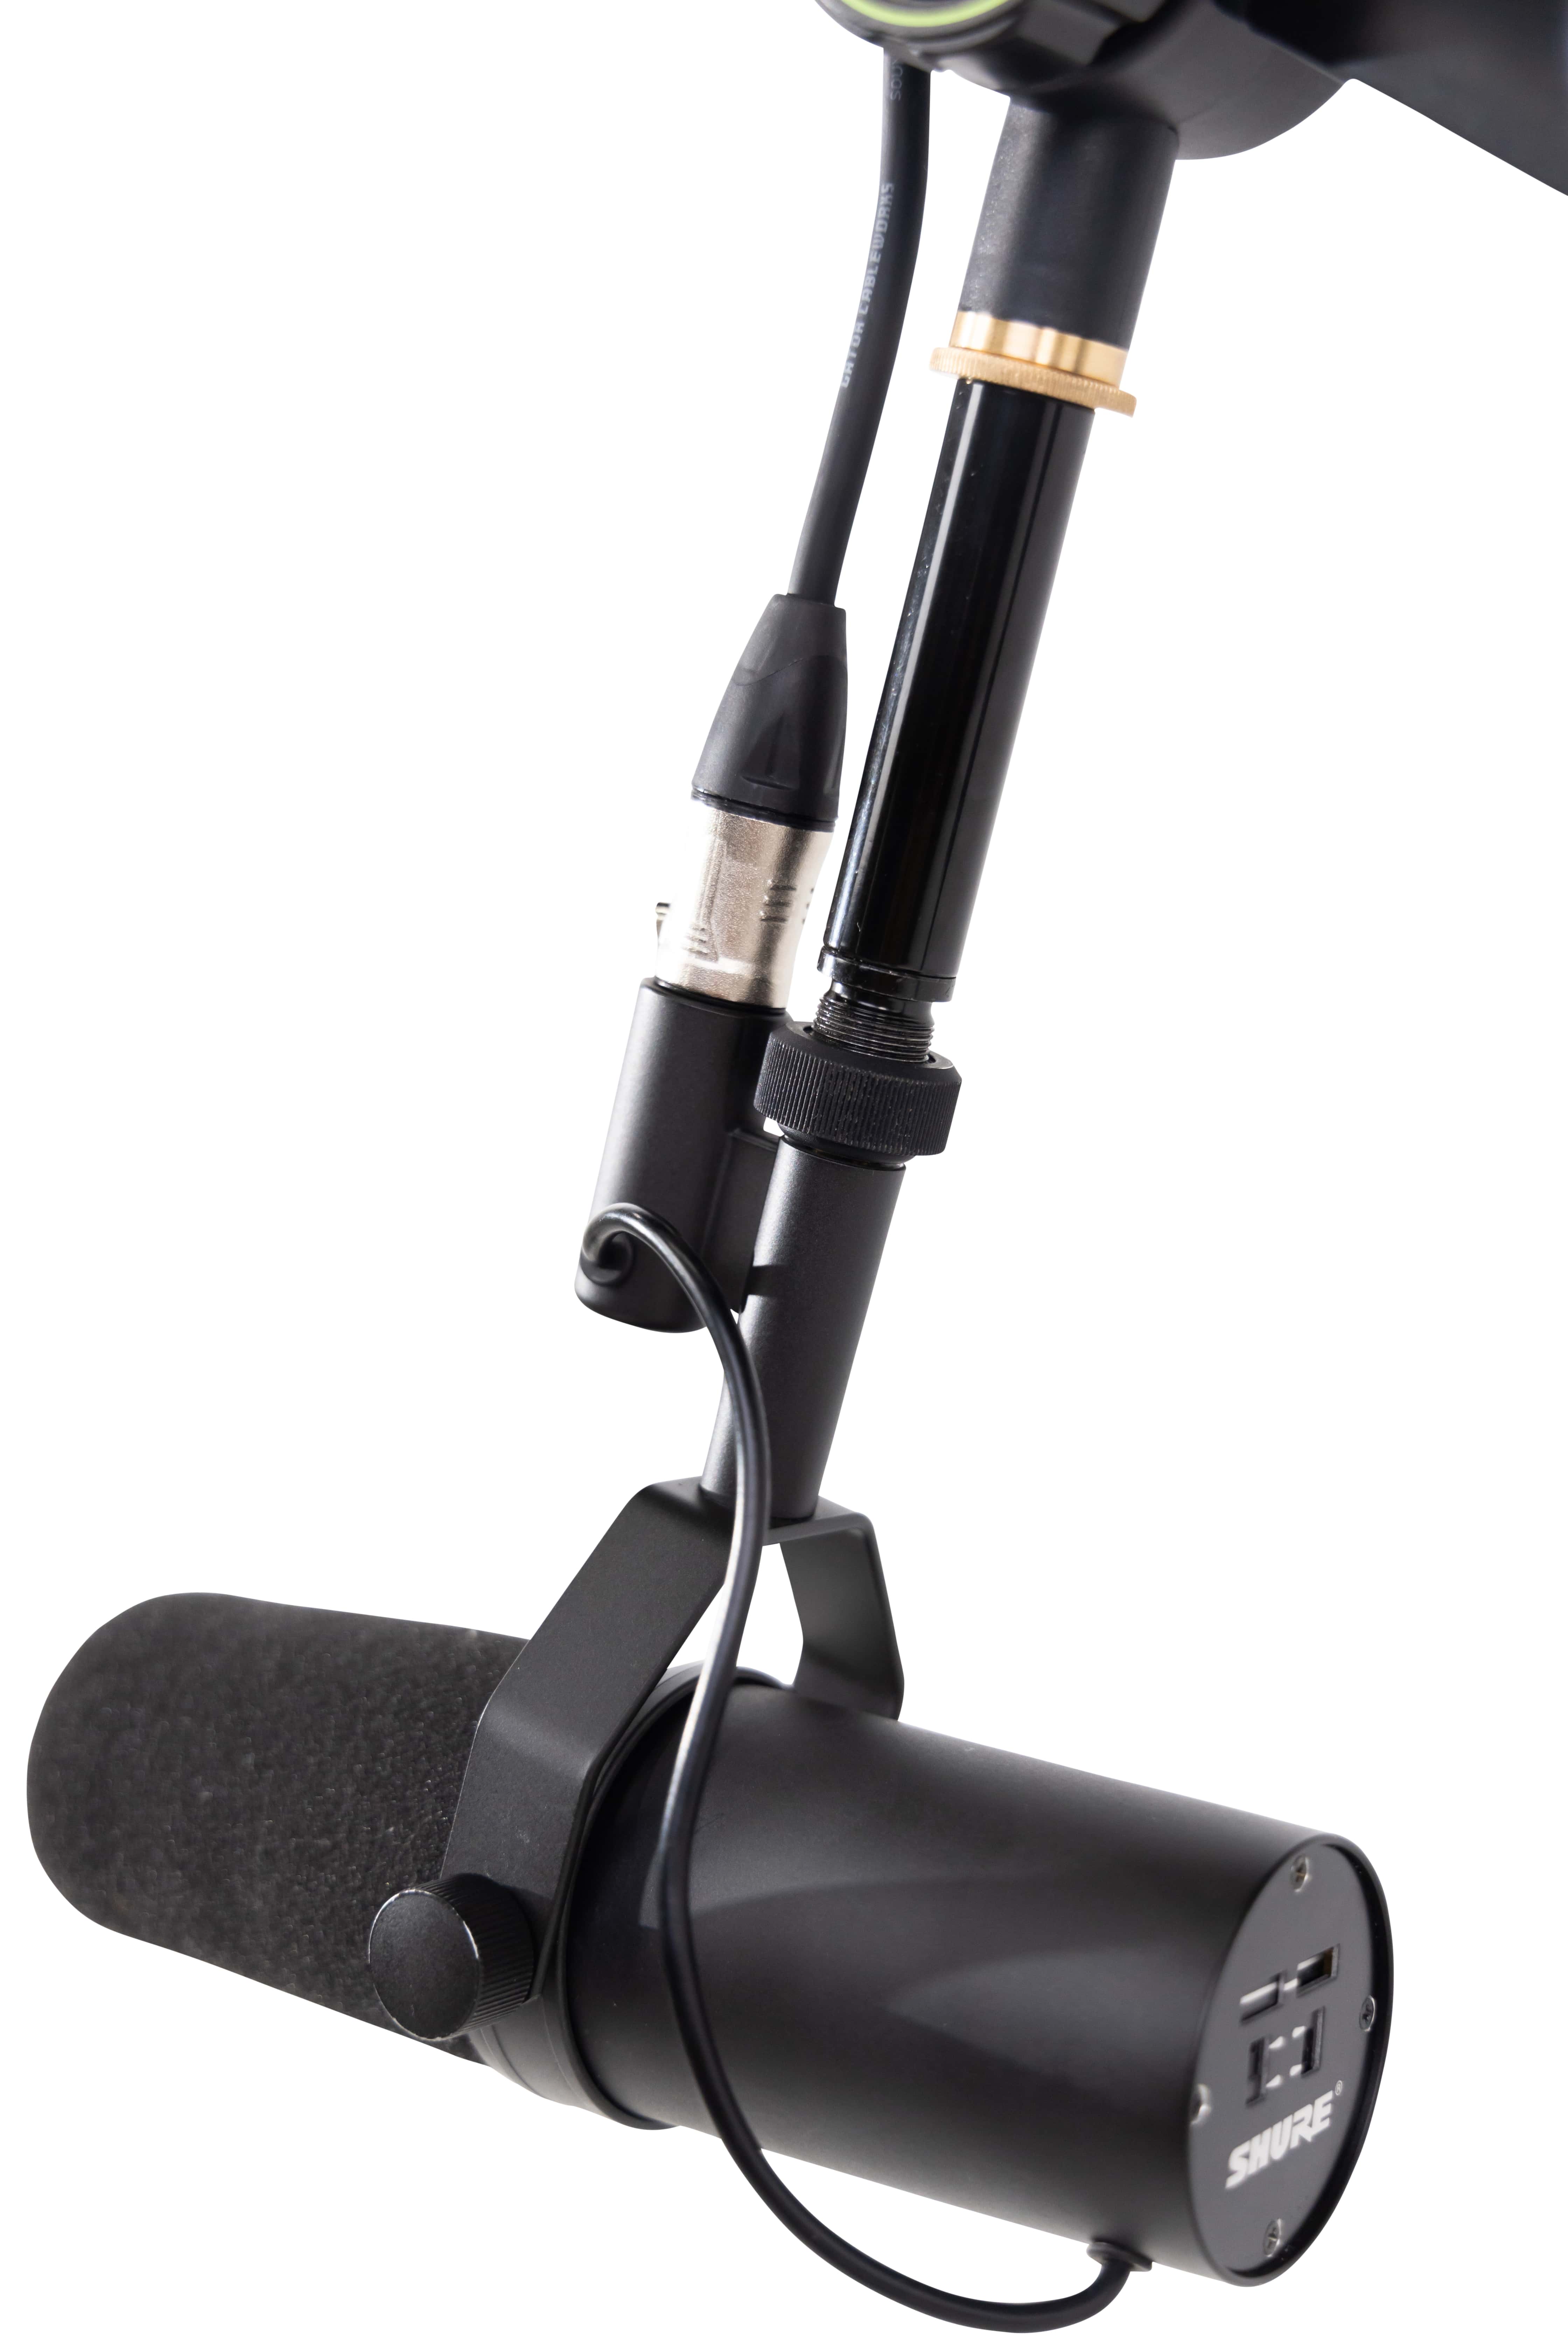 Gator Frameworks Bras Articule A Pince Deluxe Pour Micro - Microphone stand - Variation 5